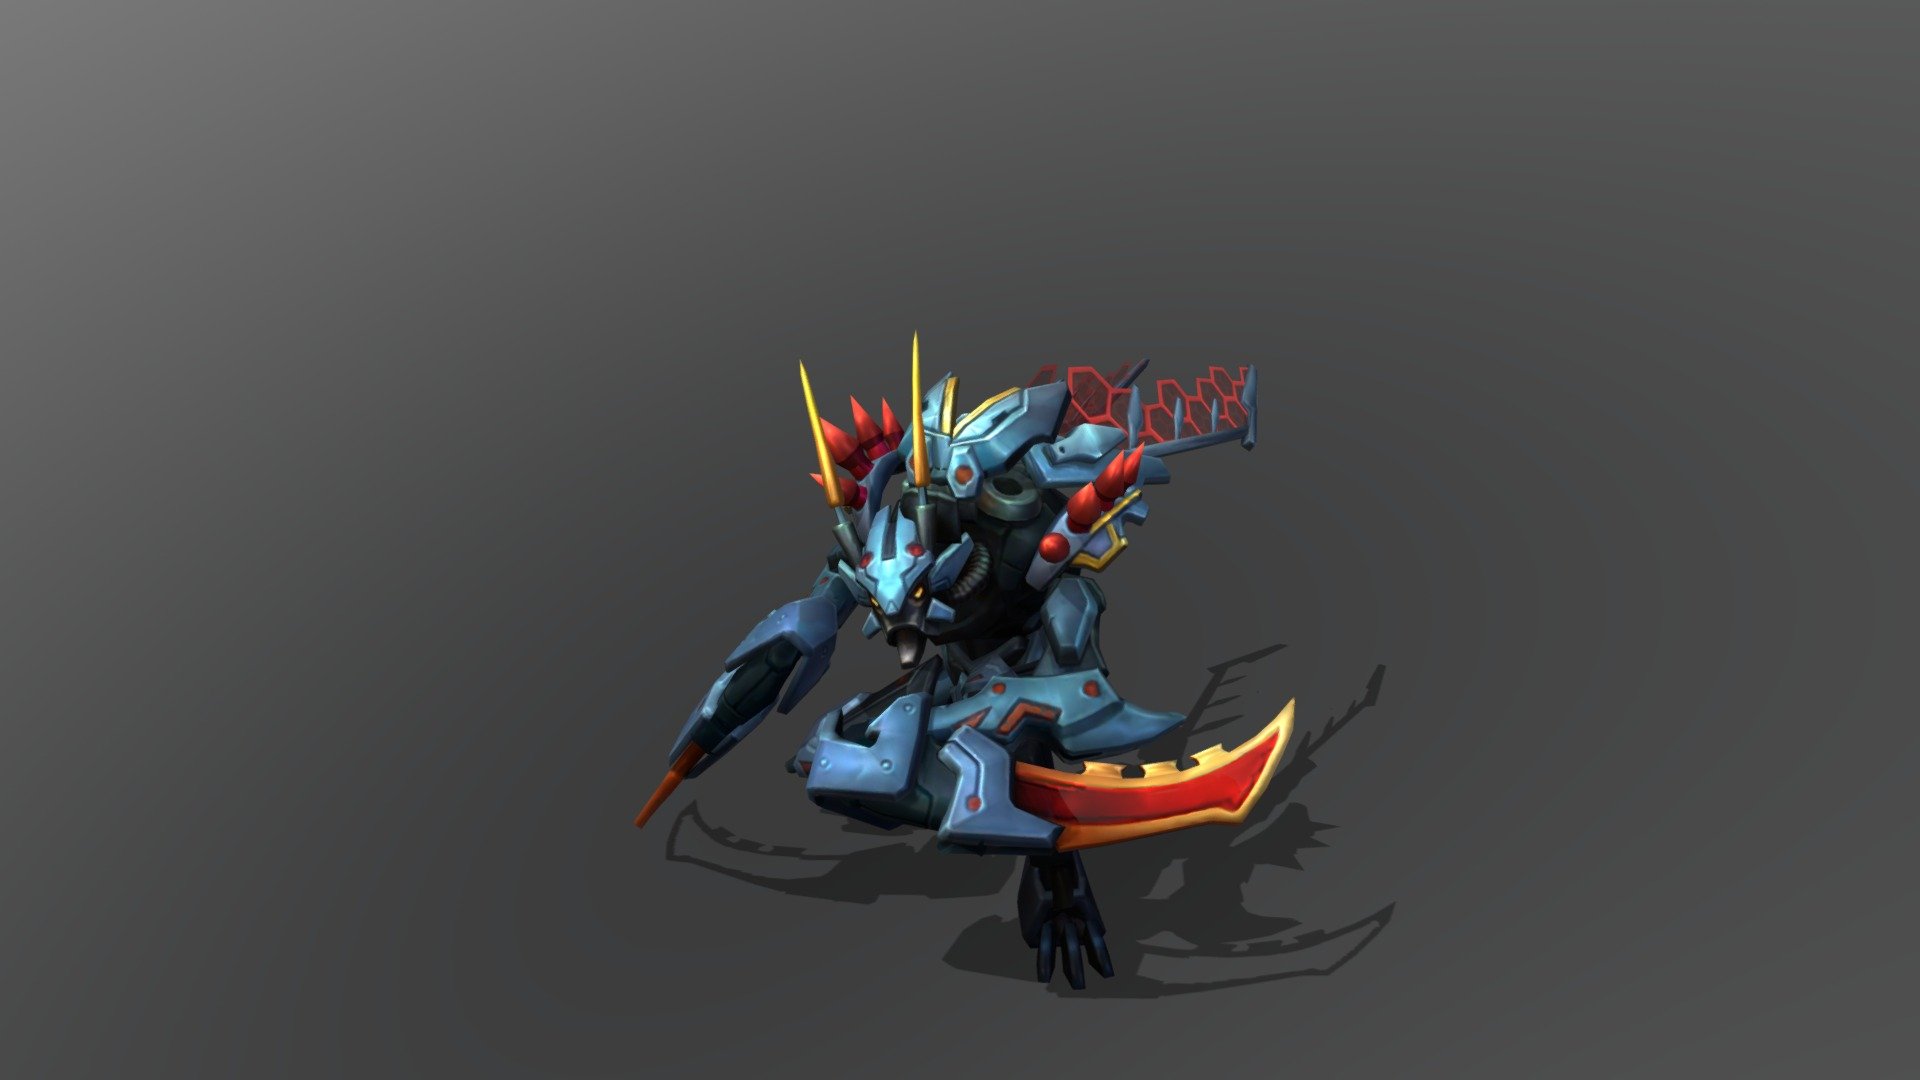 model and animations extracted from league of legends

All rights belong to their respective owners. I do not own any of this content.

i am not affiliated with Riot Games or League of Legends - kha zix mecha - 3D model by test (@test6) 3d model